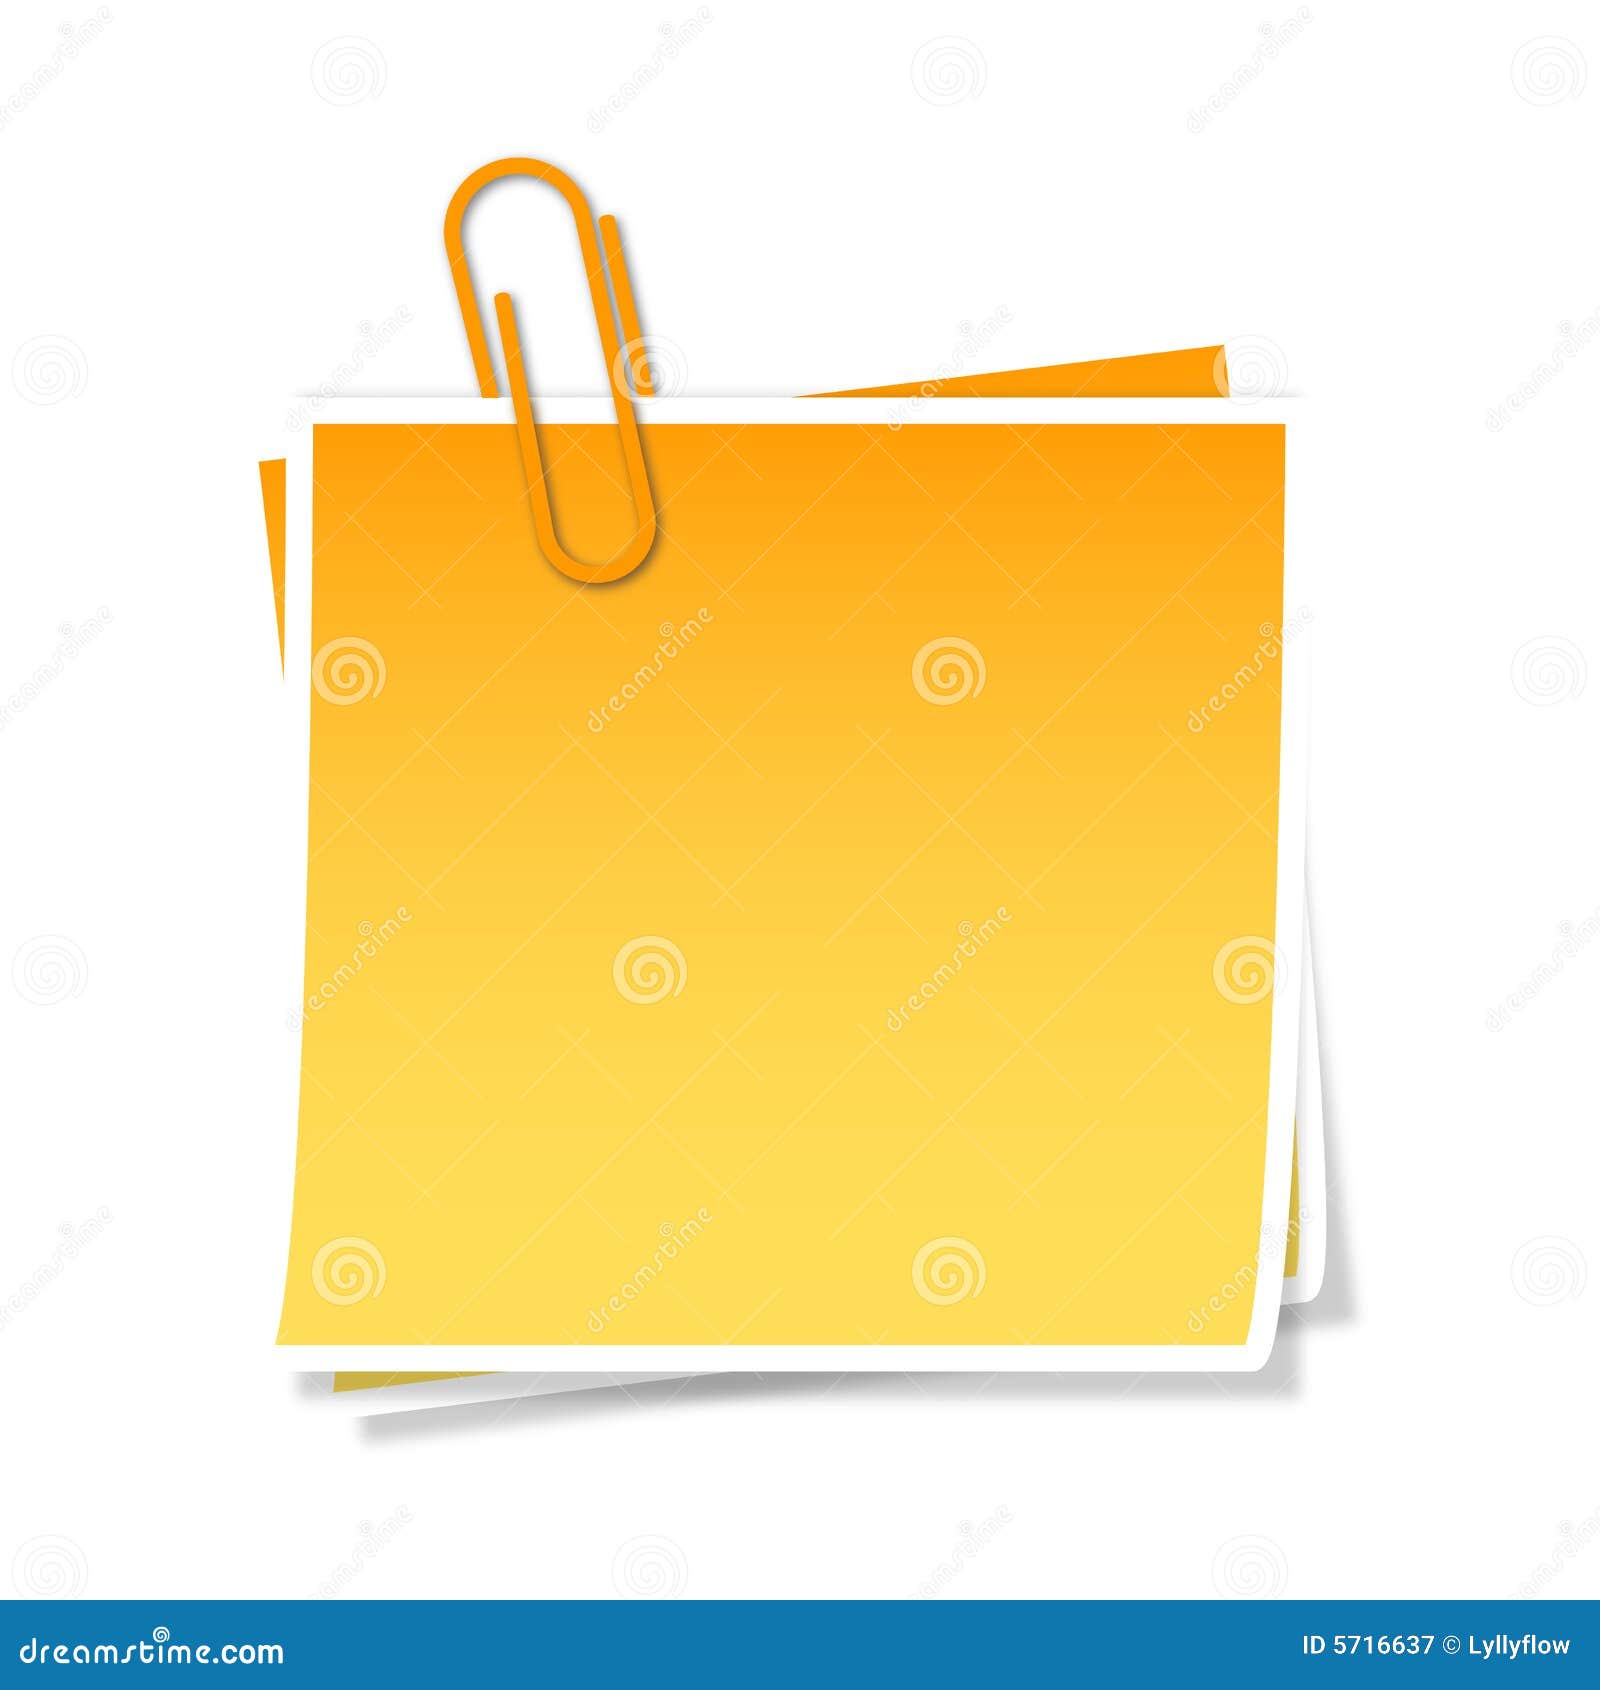 vector free download post it - photo #22